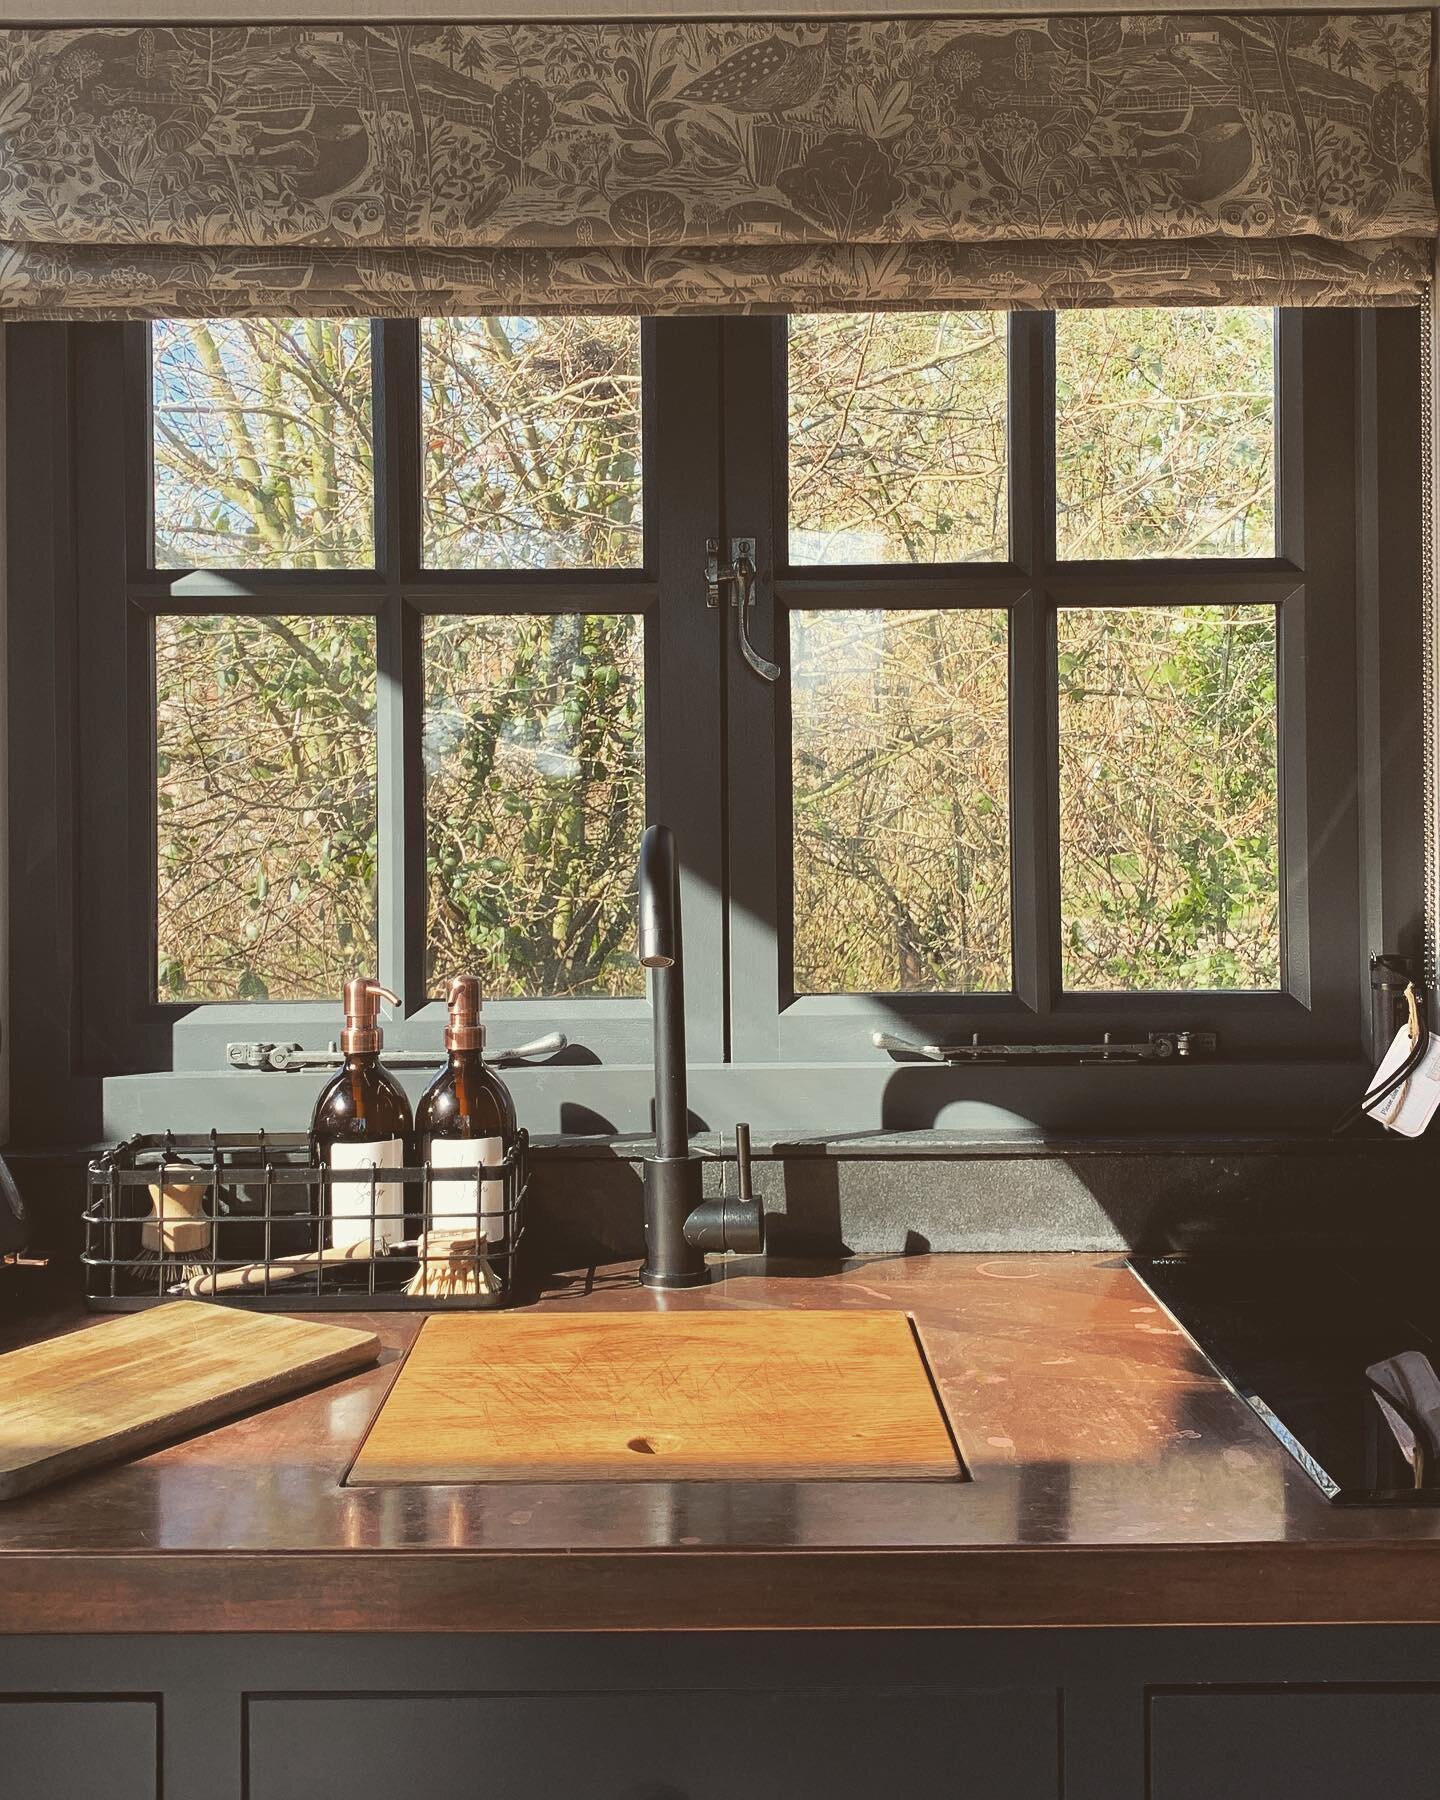 That little sun spot ☀️ 🥰

I love the feeling of the sun shining in through the shepherd hut windows, &amp; seeing the green leaves appearing on the trees, Spring is nearly here and we cannot wait! 

PS how much do you love our copper kitchen workto